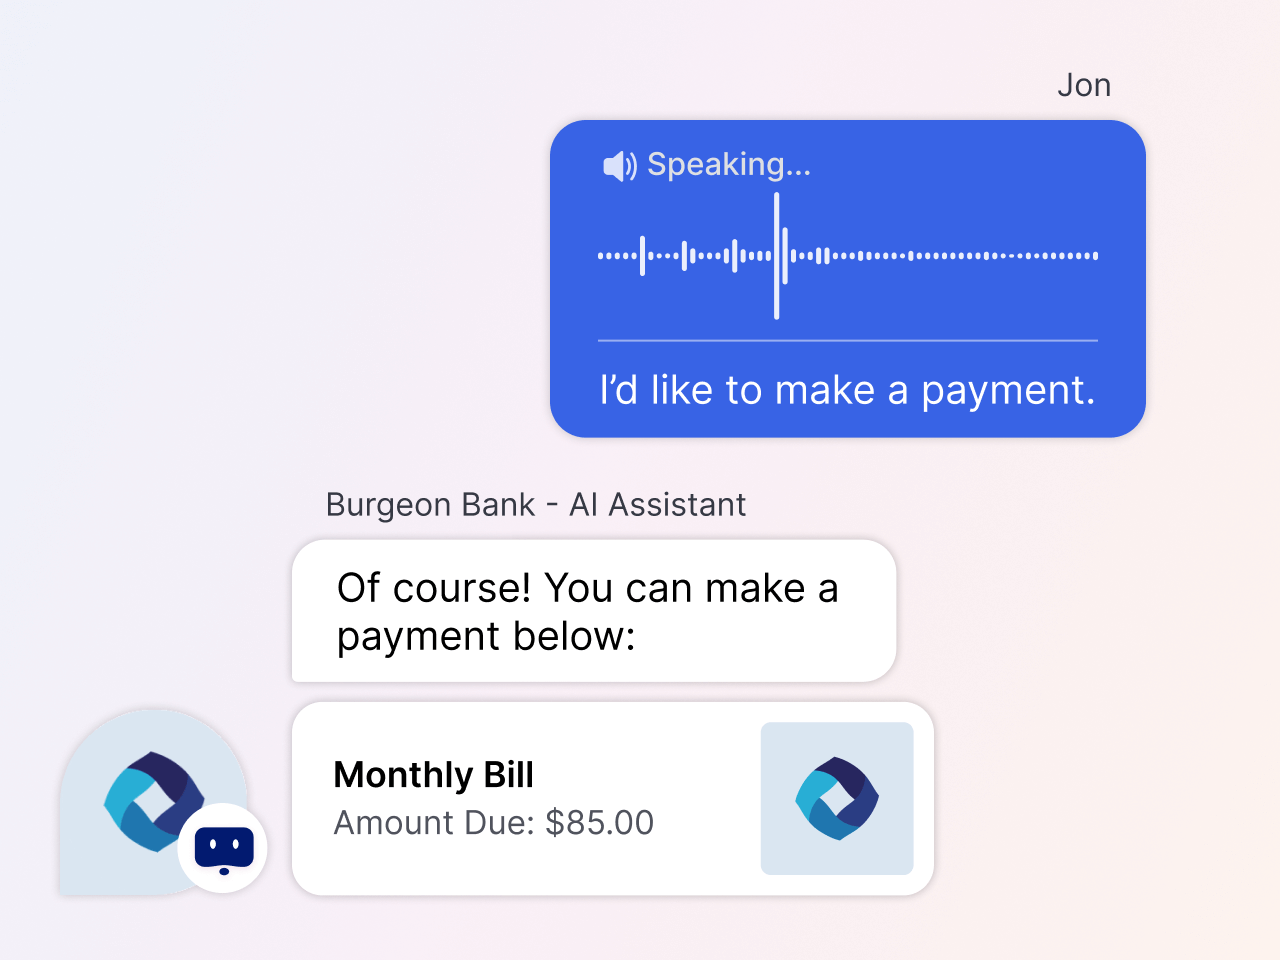 voice bots recognizing spoken request and responding with payment instructions, helping provide better customer experiences